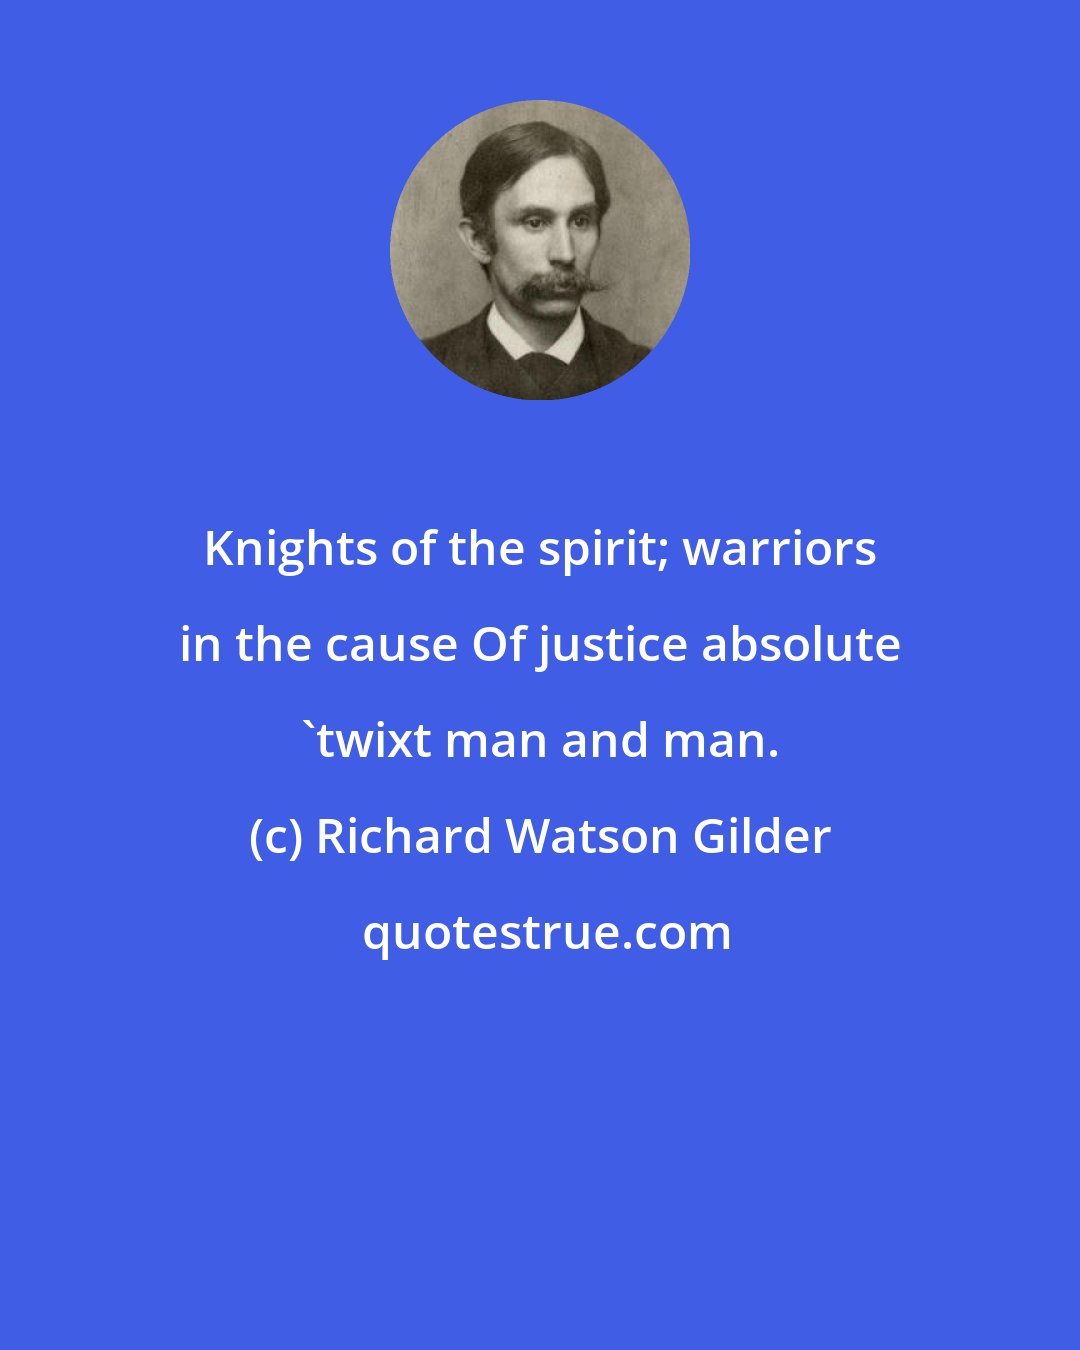 Richard Watson Gilder: Knights of the spirit; warriors in the cause Of justice absolute 'twixt man and man.